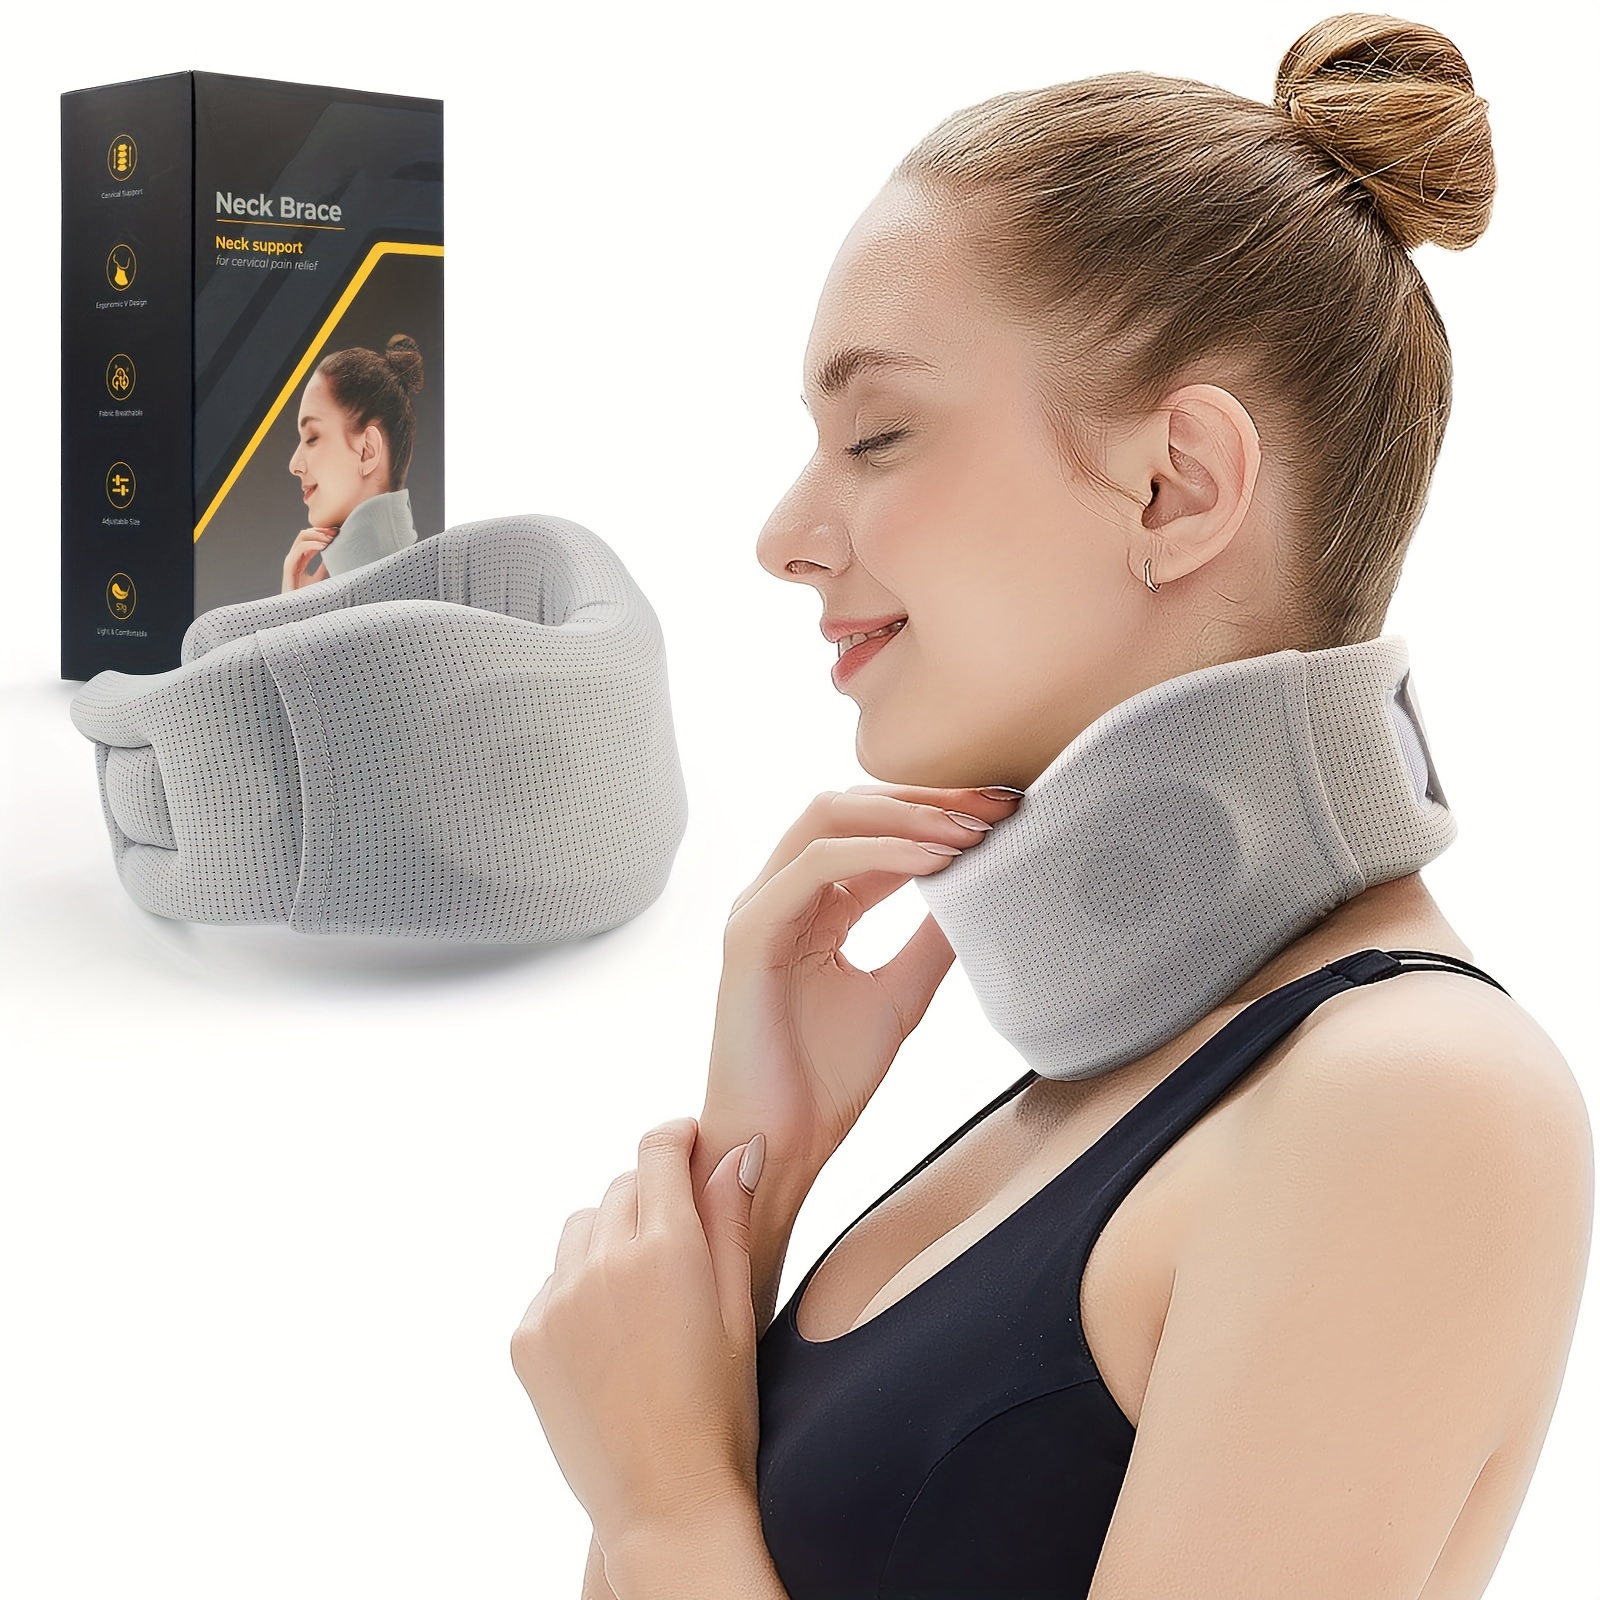 Soft Foam Neck Brace Universal Cervical Collar, Adjustable Support Brace  for Sleeping - Relieves Pain and Spine Pressure, Neck Collar After Whiplash